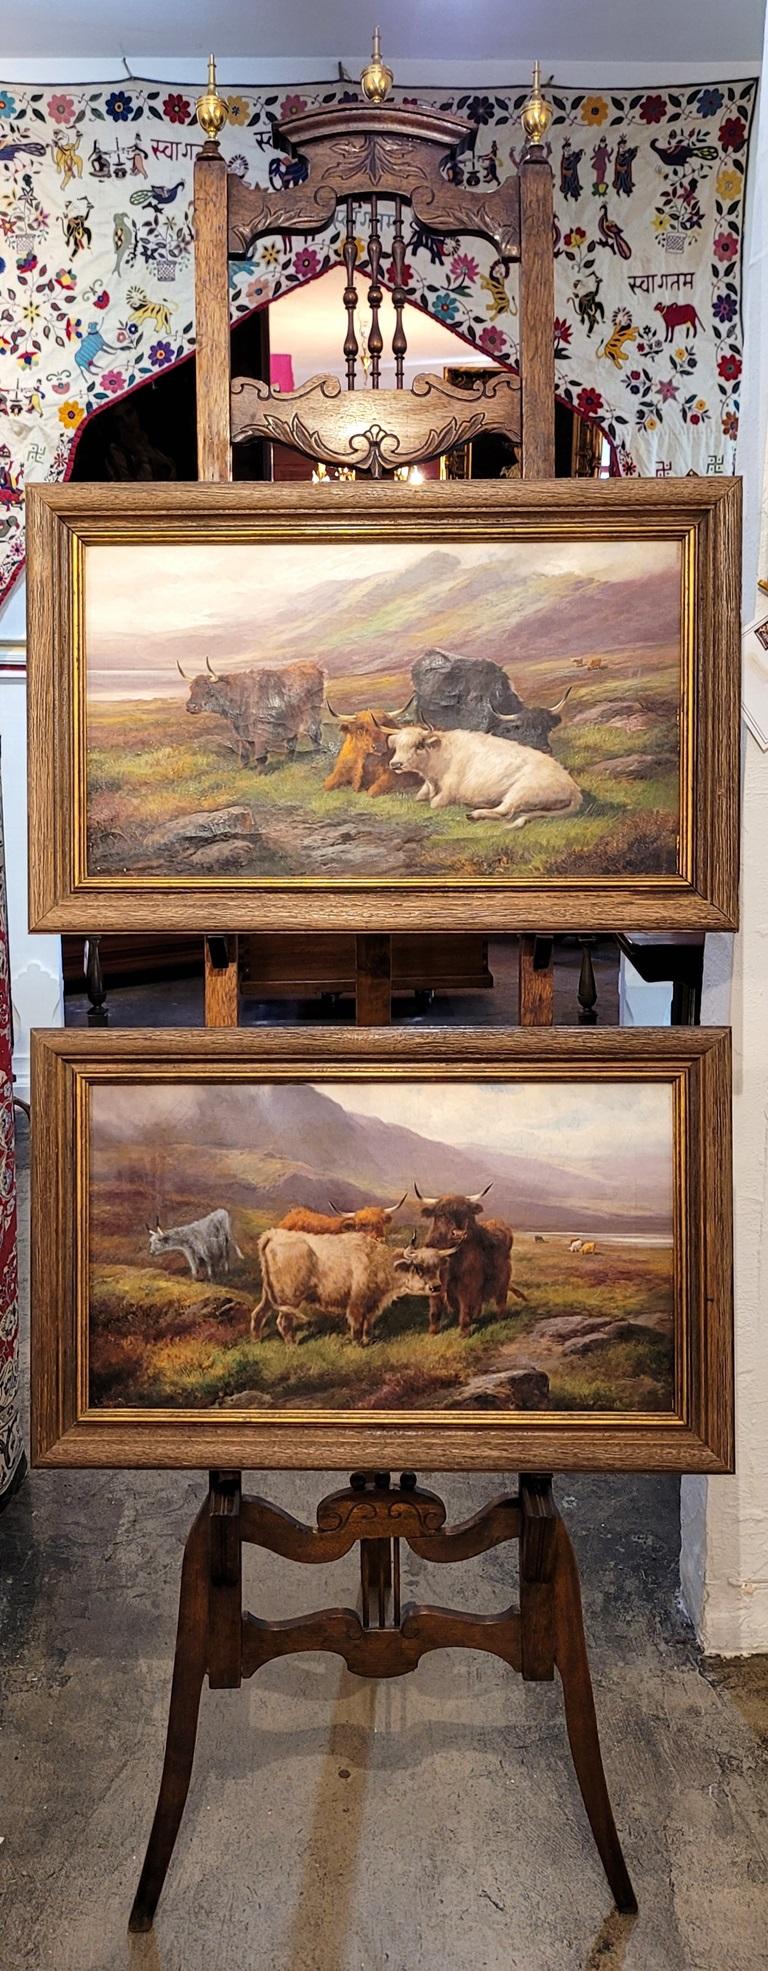 PRESENTING A STUNNING & RARE Pair of 19C Oils on Canvas of Highland Cattle by John W Morris.

Circa 1890-1900 and painted by John W. Morris, a renowned British Artist, known for his Scottish Highland scenes and in particular his depiction of